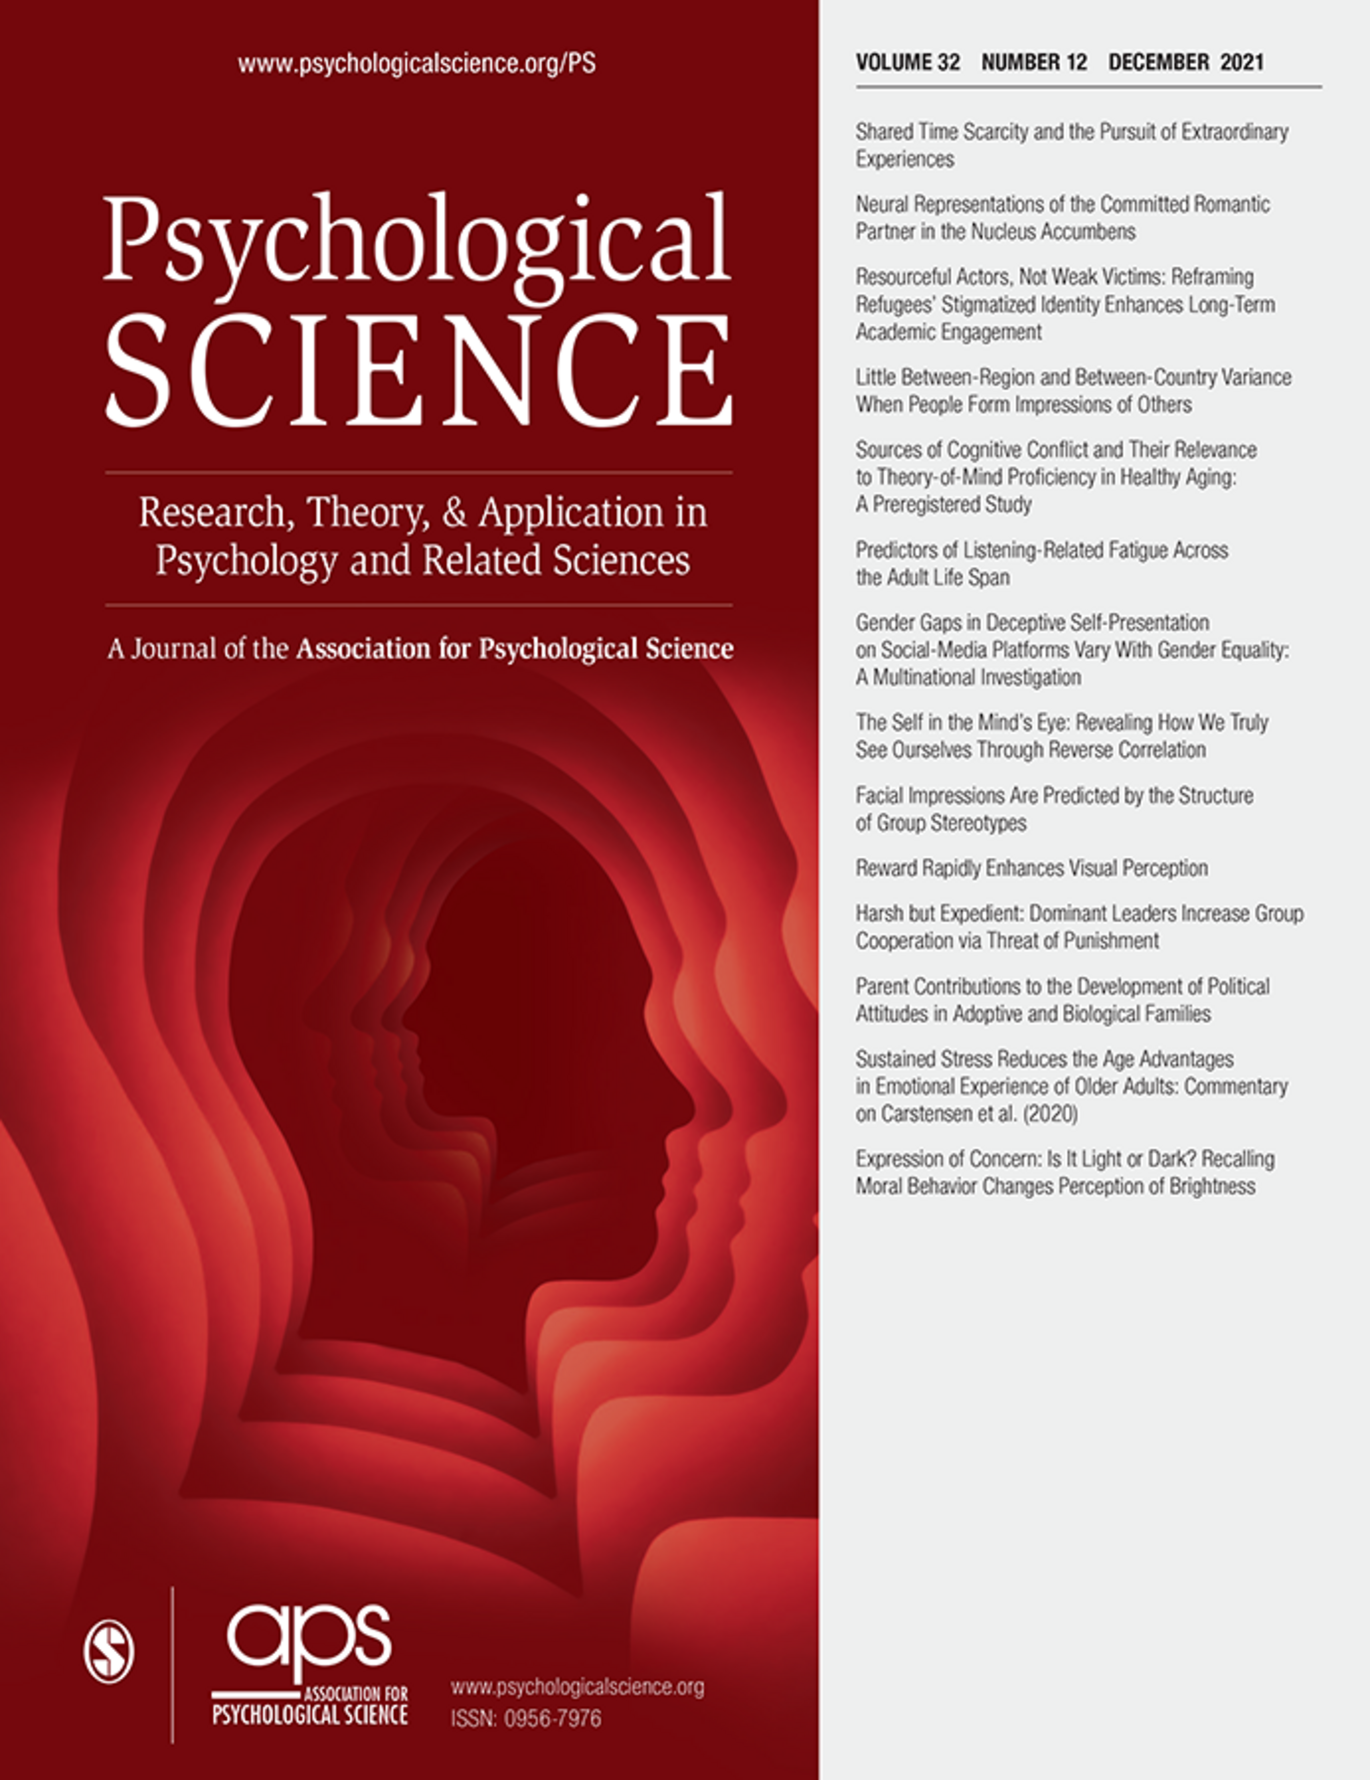 The Cover of PSYCHOLOGICAL SCIENCE 2021, Vol.32